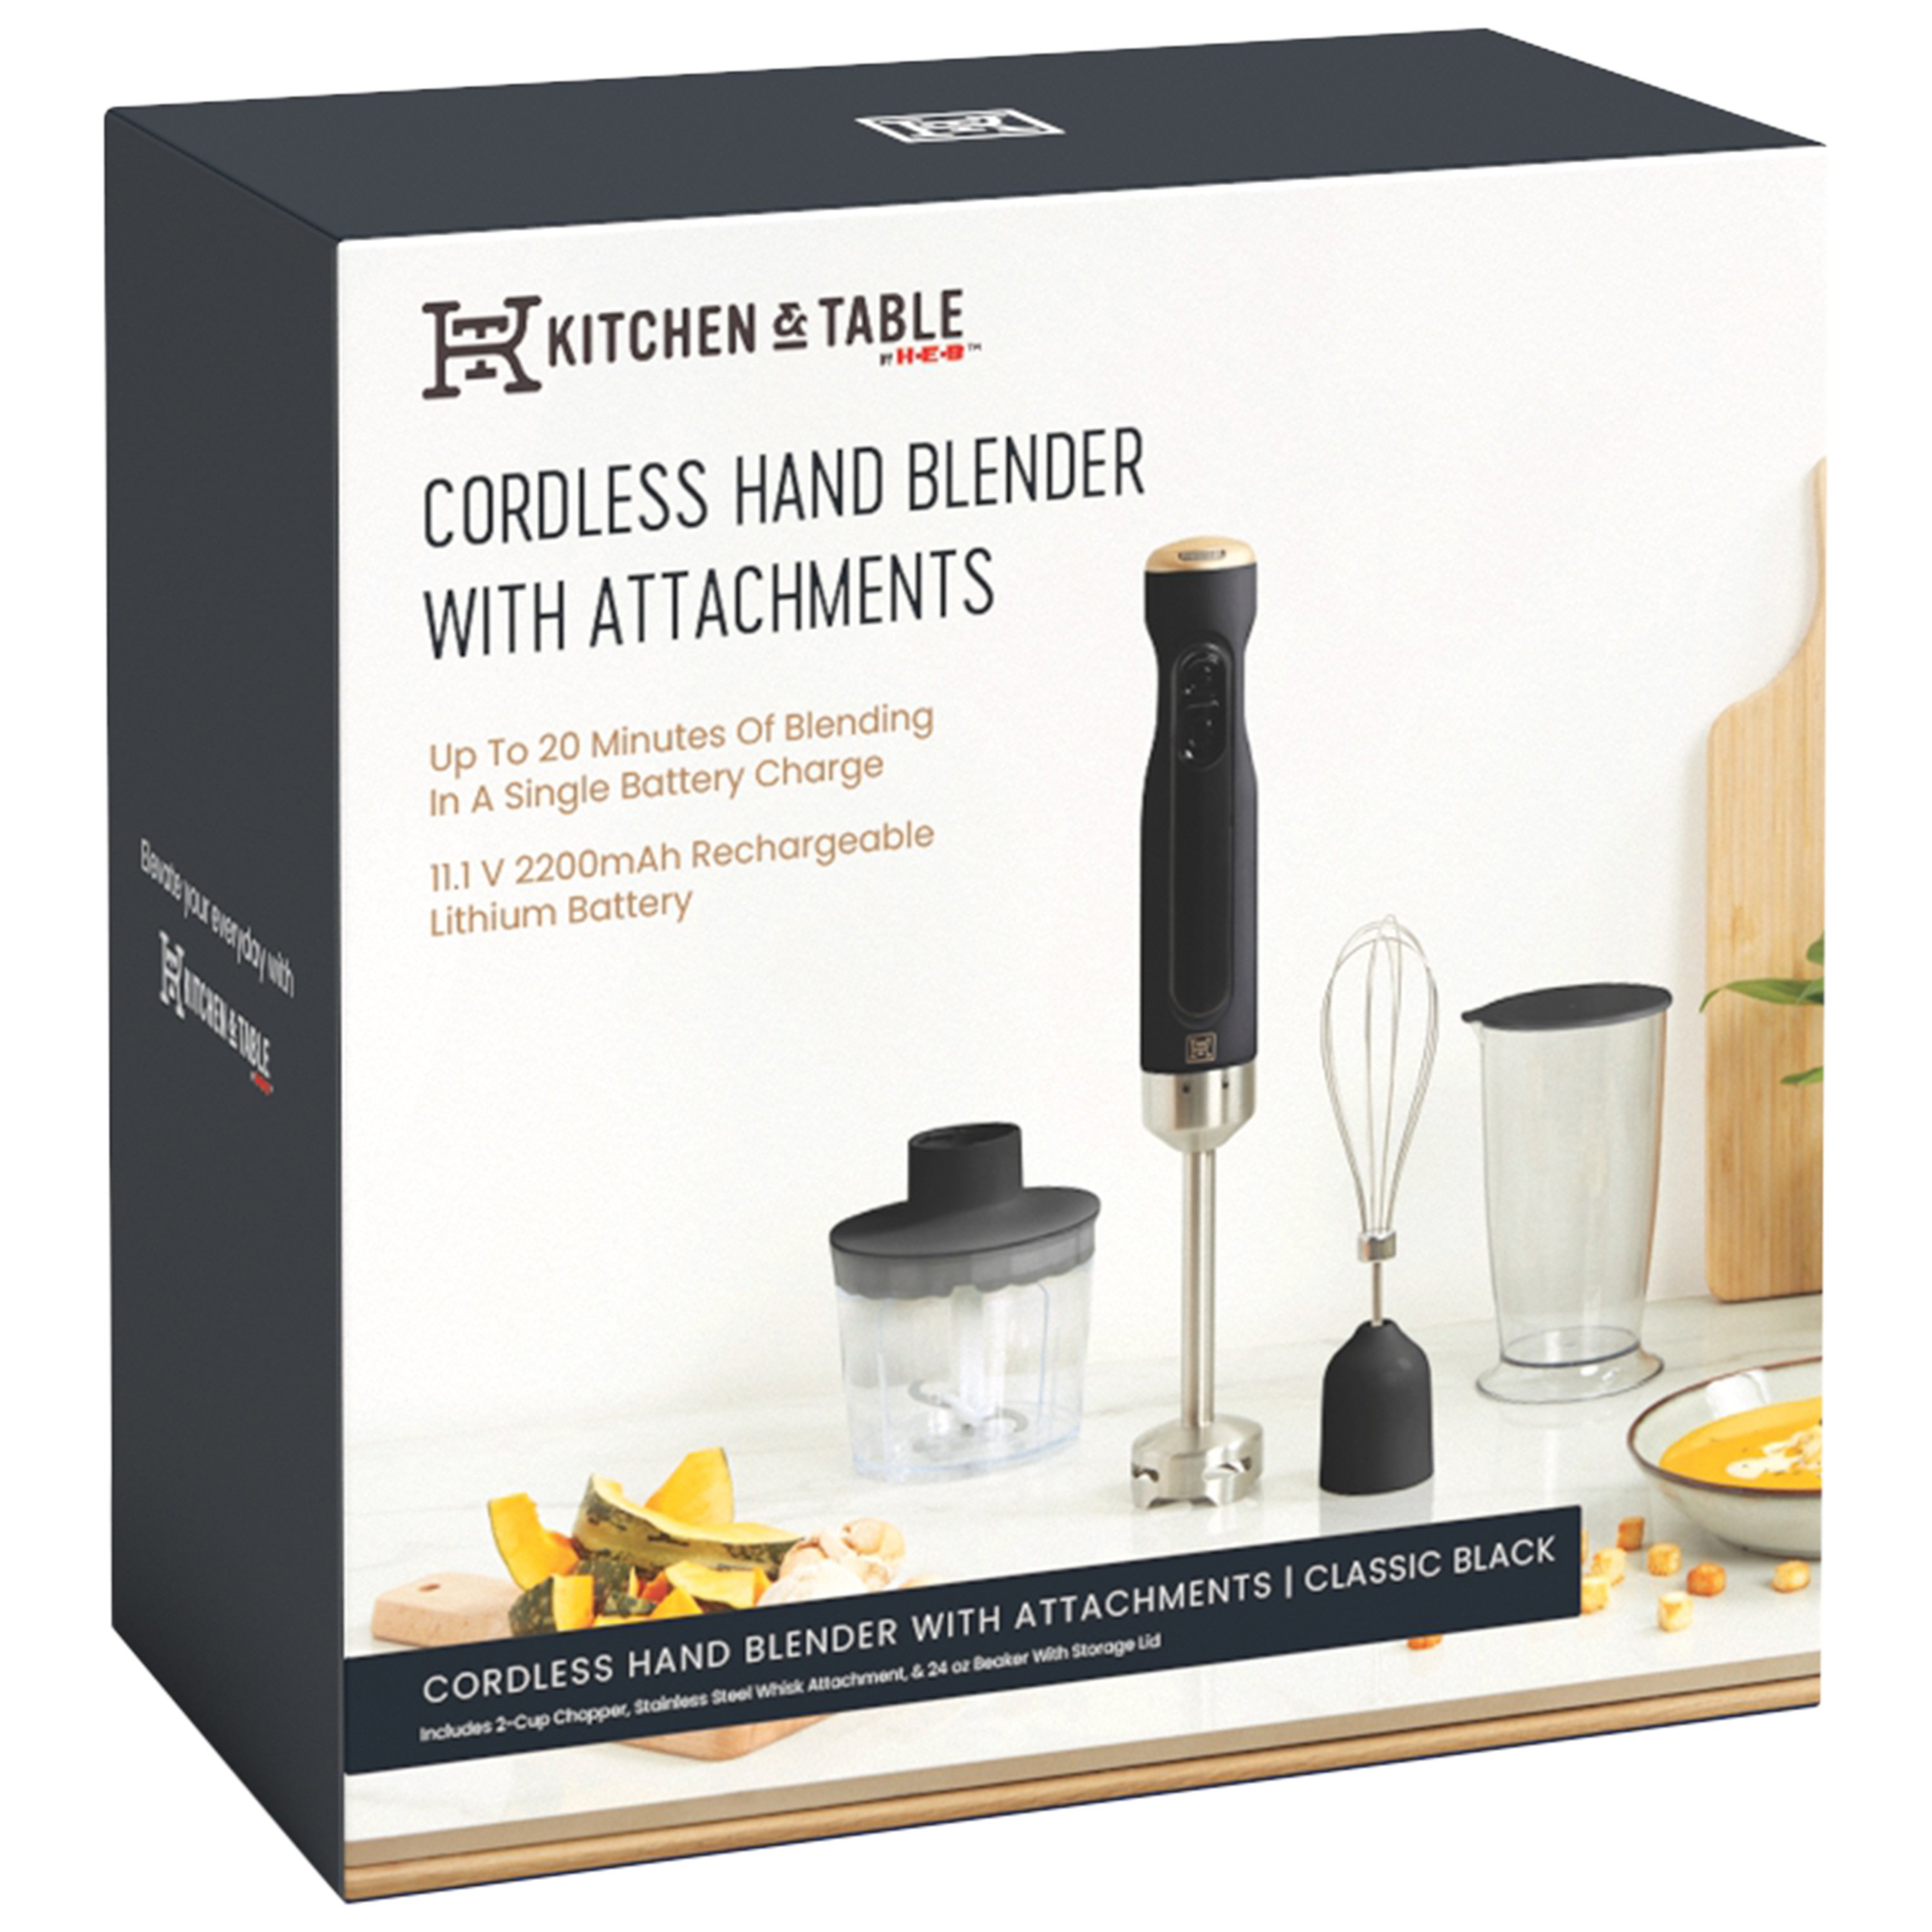 Kitchen & Table by H-E-B 10-Speed Digital Hand Mixer - Cloud White